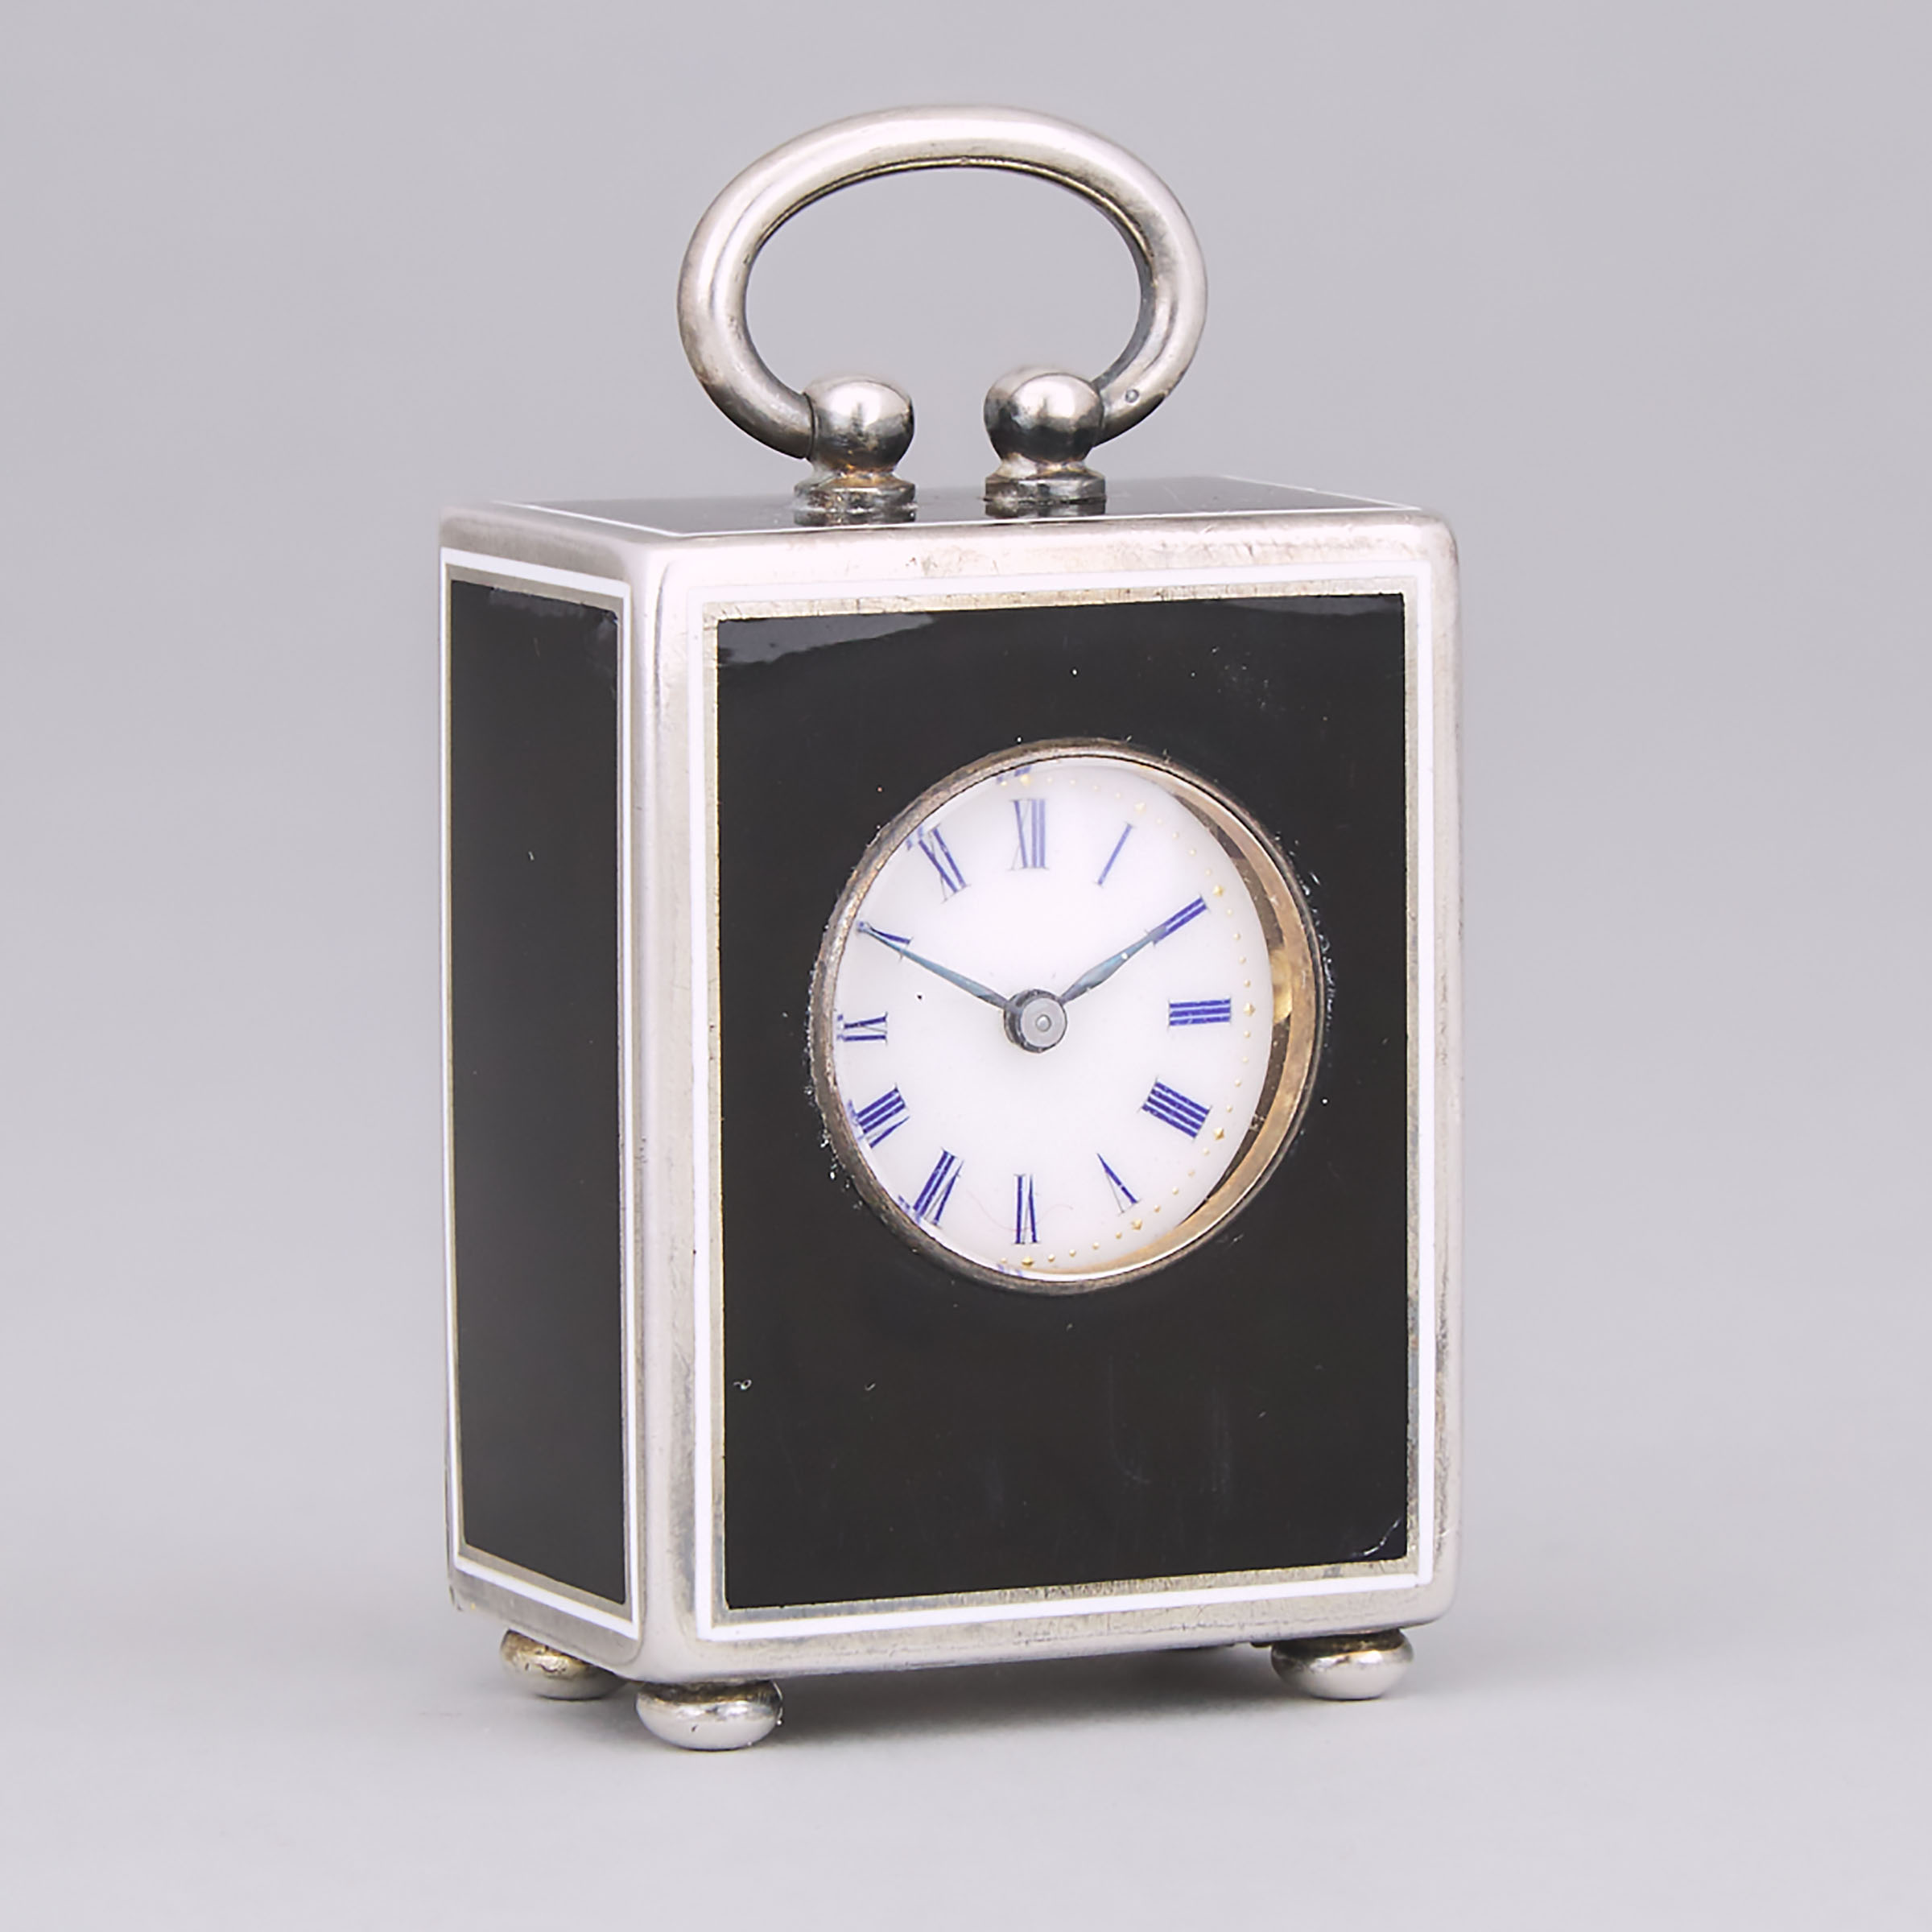 Continental Black and White Enameled and Engraved Silver Cased Miniature Desk Clock, probably Swiss, early 20th century